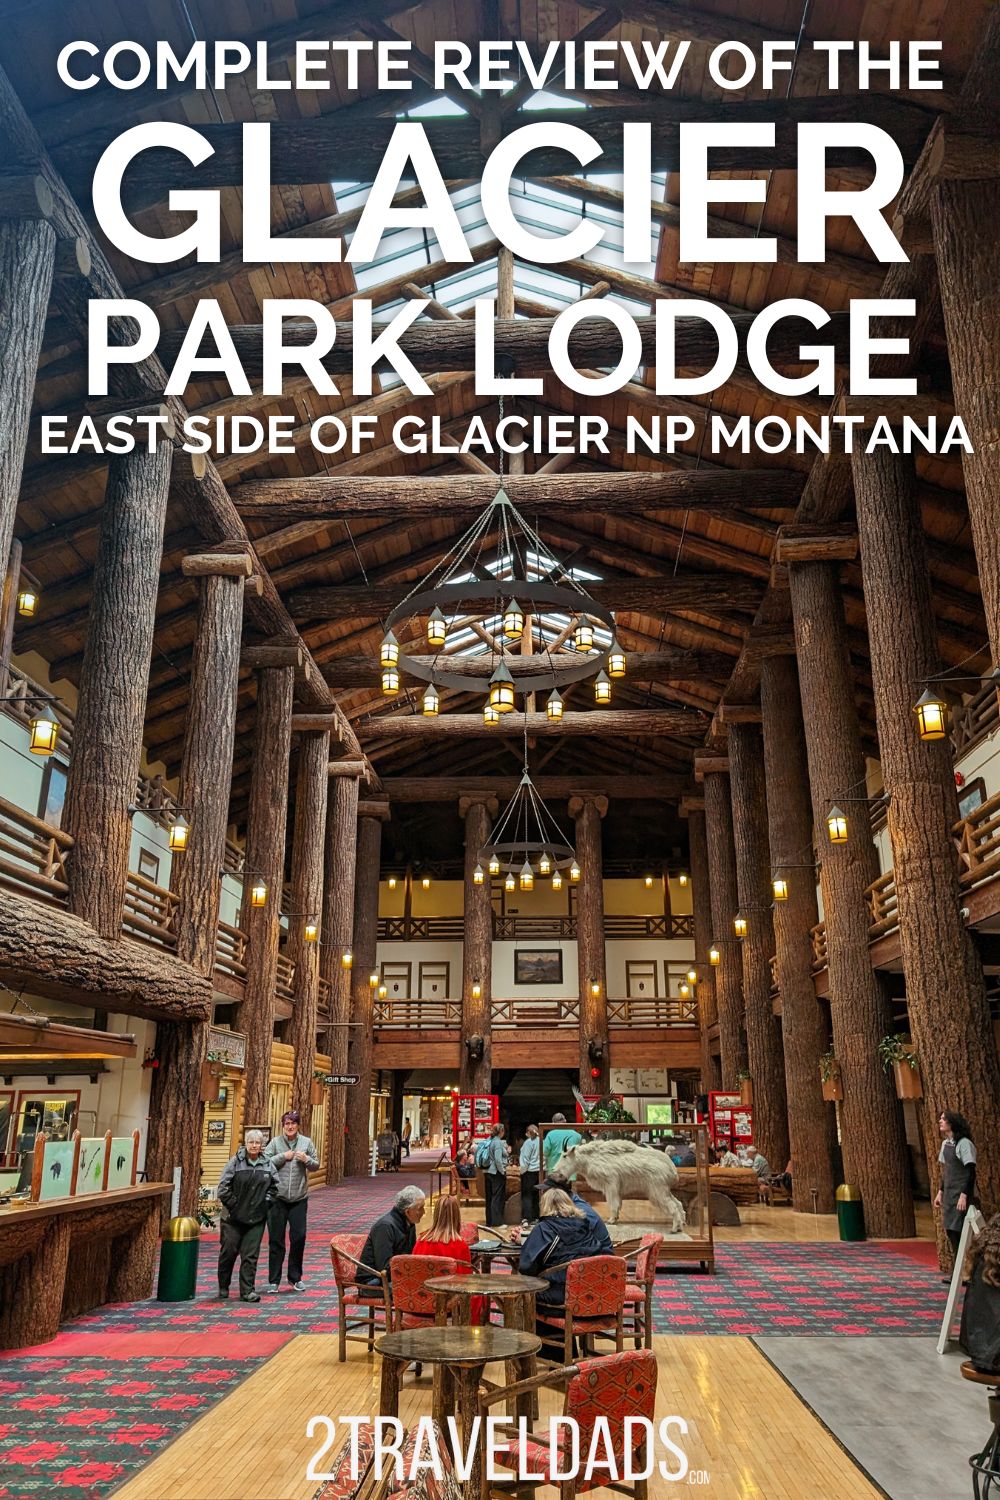 Full review of the Glacier Park Lodge on the east side of Glacier National Park in Montana. From opinions about the rooms to reviews of the dining options at the lodge, this is what you can expect at this vintage National Park hotel.